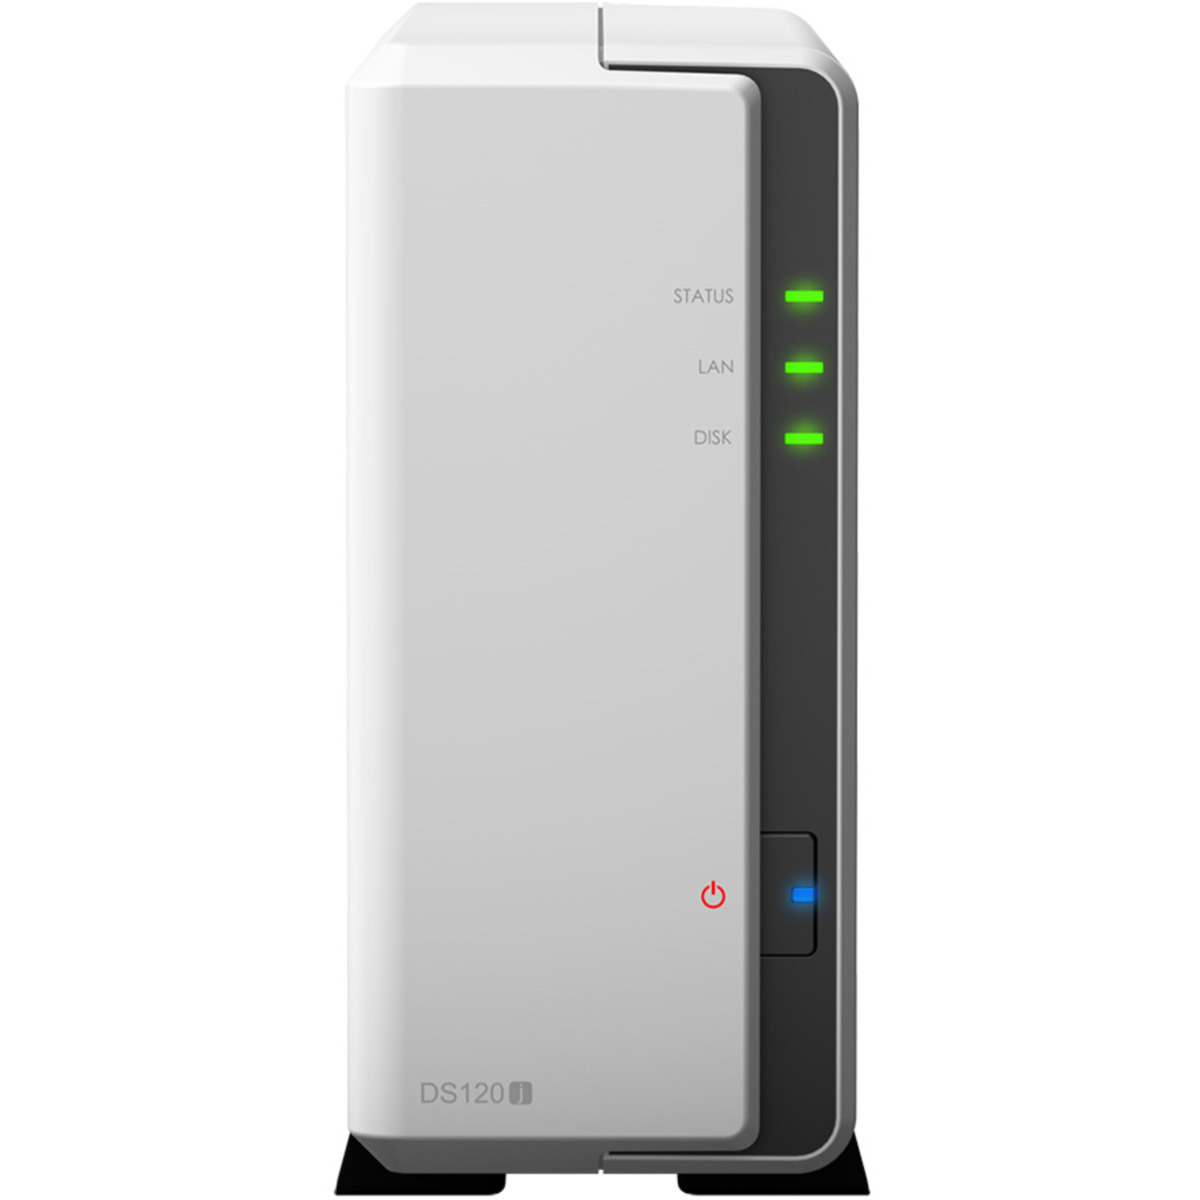 Synology DS120j NAS - Network Attached Storage Device Burn-In Tested Configurations